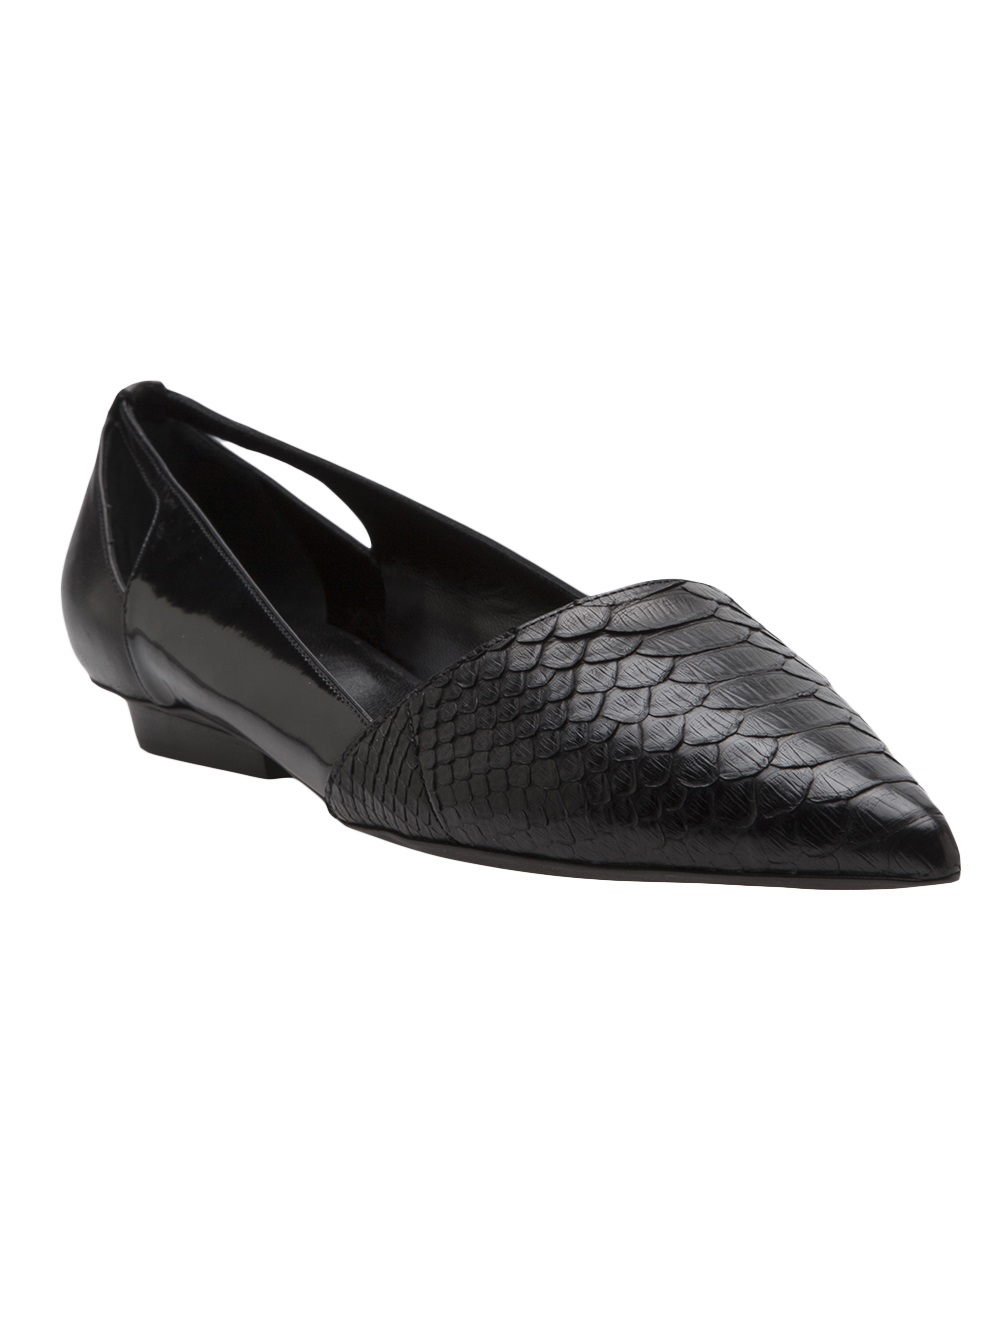 Lyst - Narciso Rodriguez Pointed Toe Flat in Black